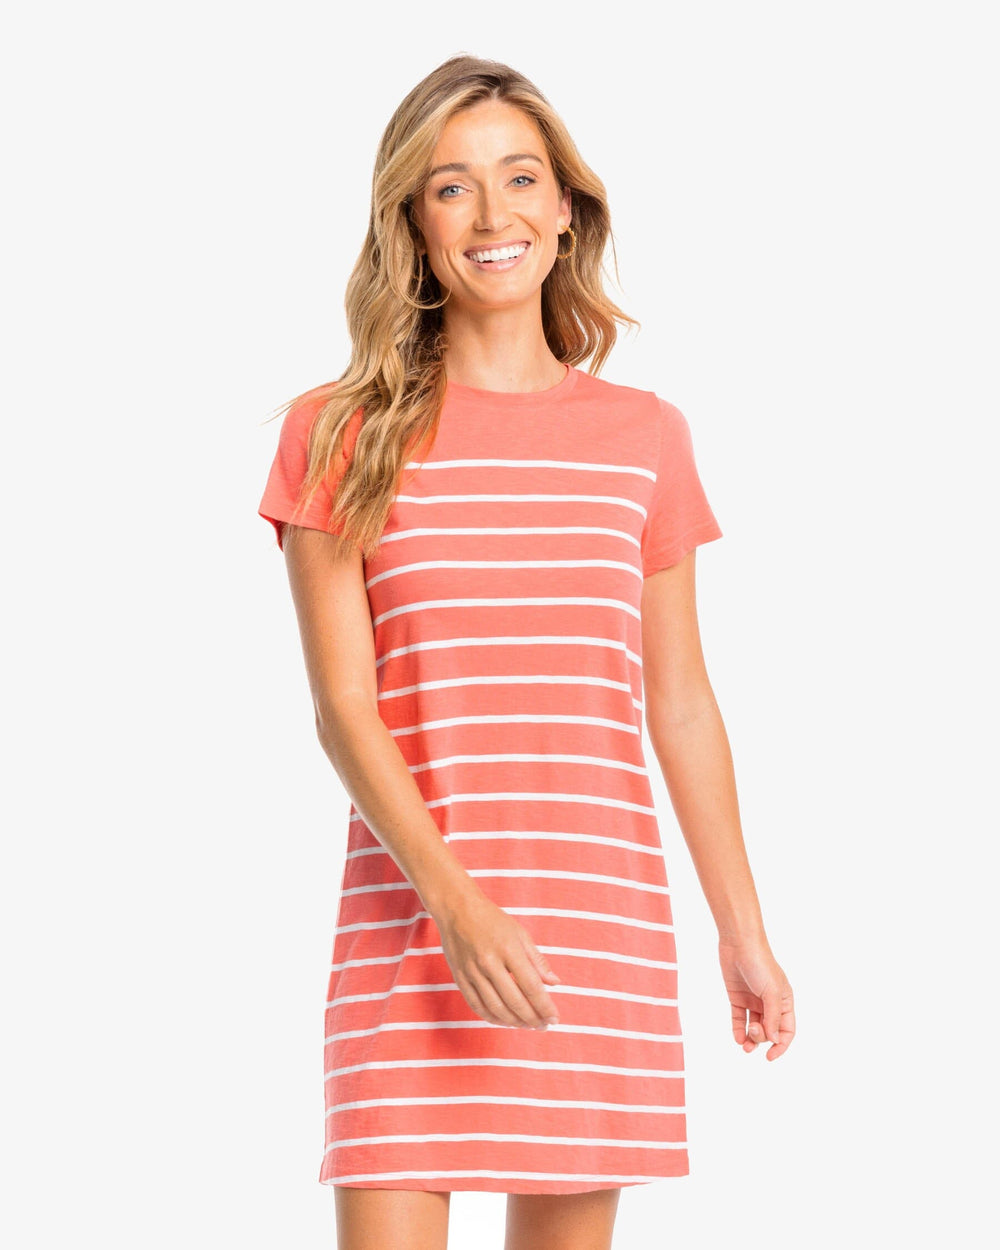 The front view of the Southern Tide Delilah Sun Farer T-shirt Shirt Dress by Southern Tide - Sunkist Coral